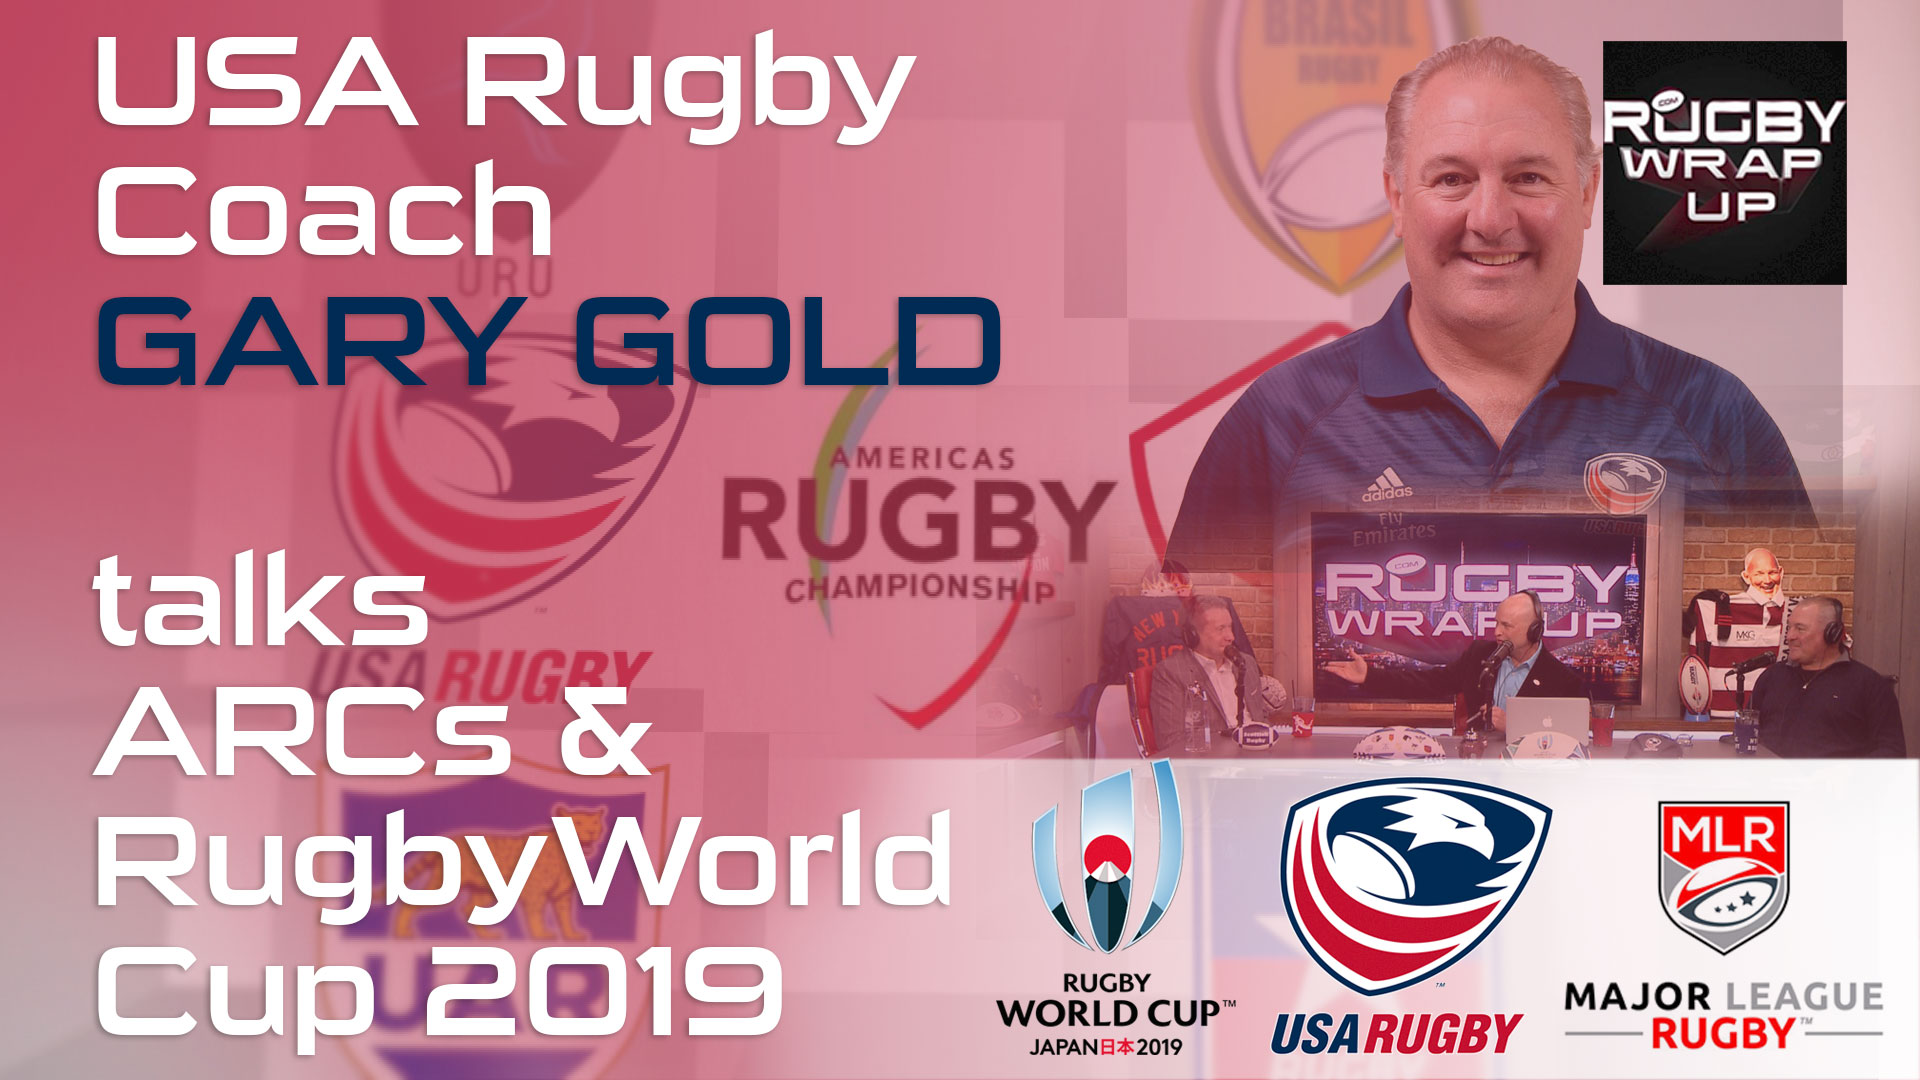 USA Rugby Head Coach Gary Gold re RWC 2019, Major League Rugby, Moving ARC | RUGBY WRAP UP